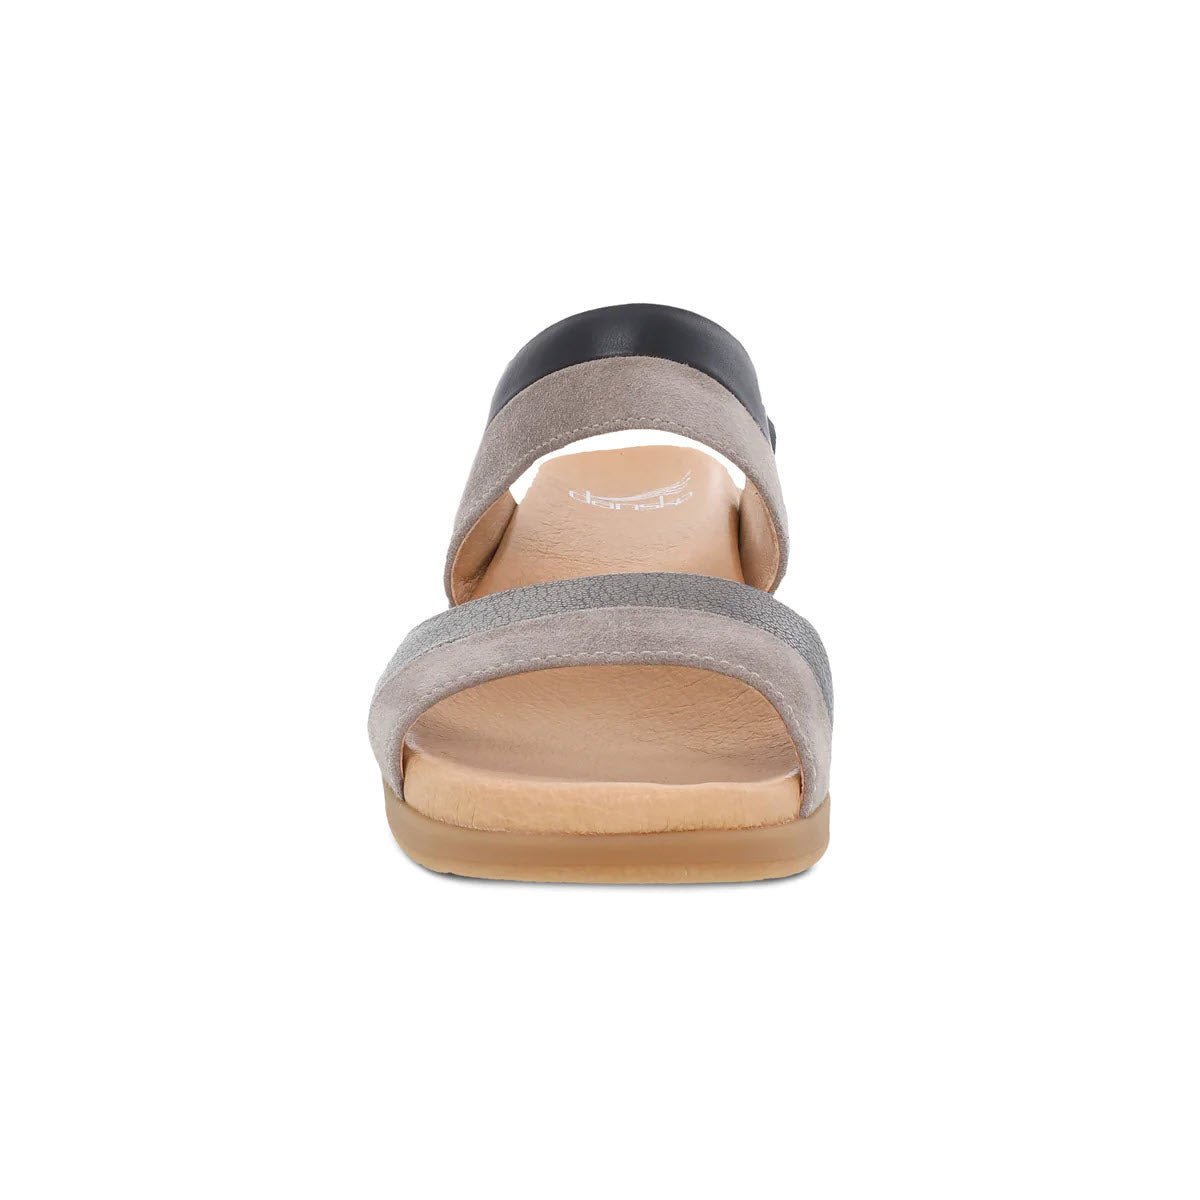 Frontal view of a single Dansko Theresa Black Multi - Womens slide sandal with elegant colors and black straps on a white background.